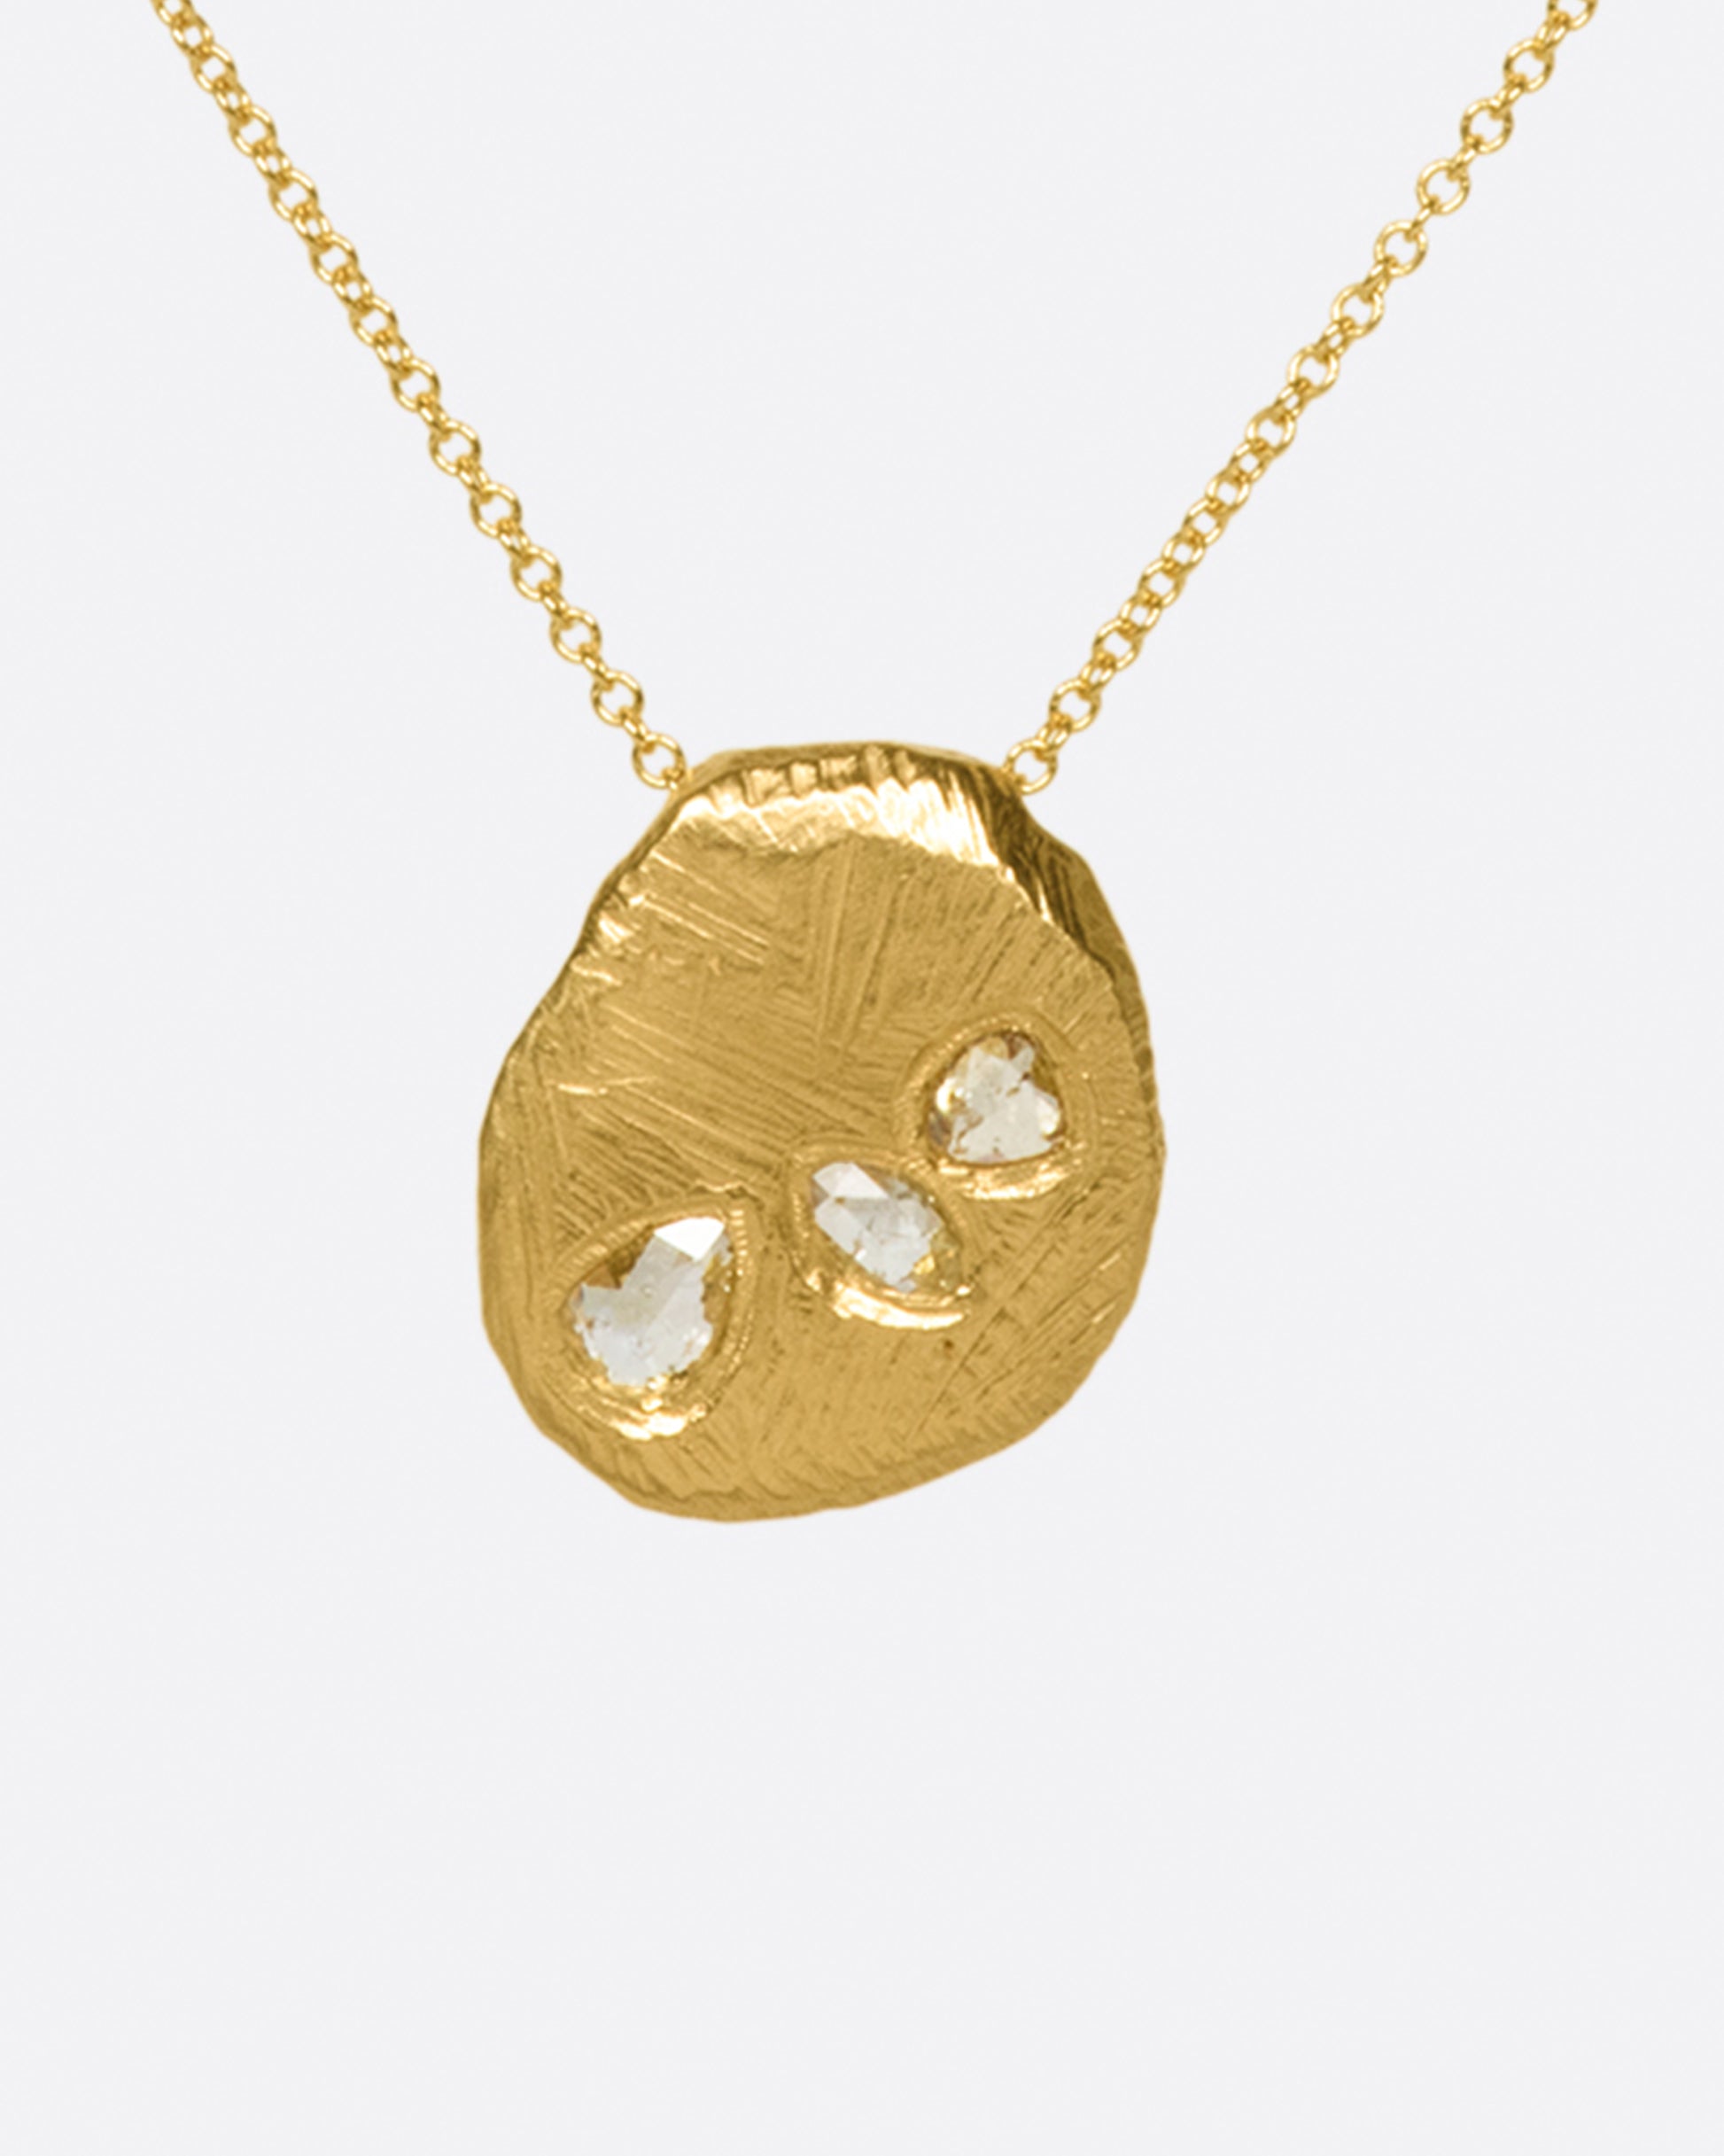 A heavy, hand carved, sliding gold pendant with three rose cut diamonds on a cable chain.